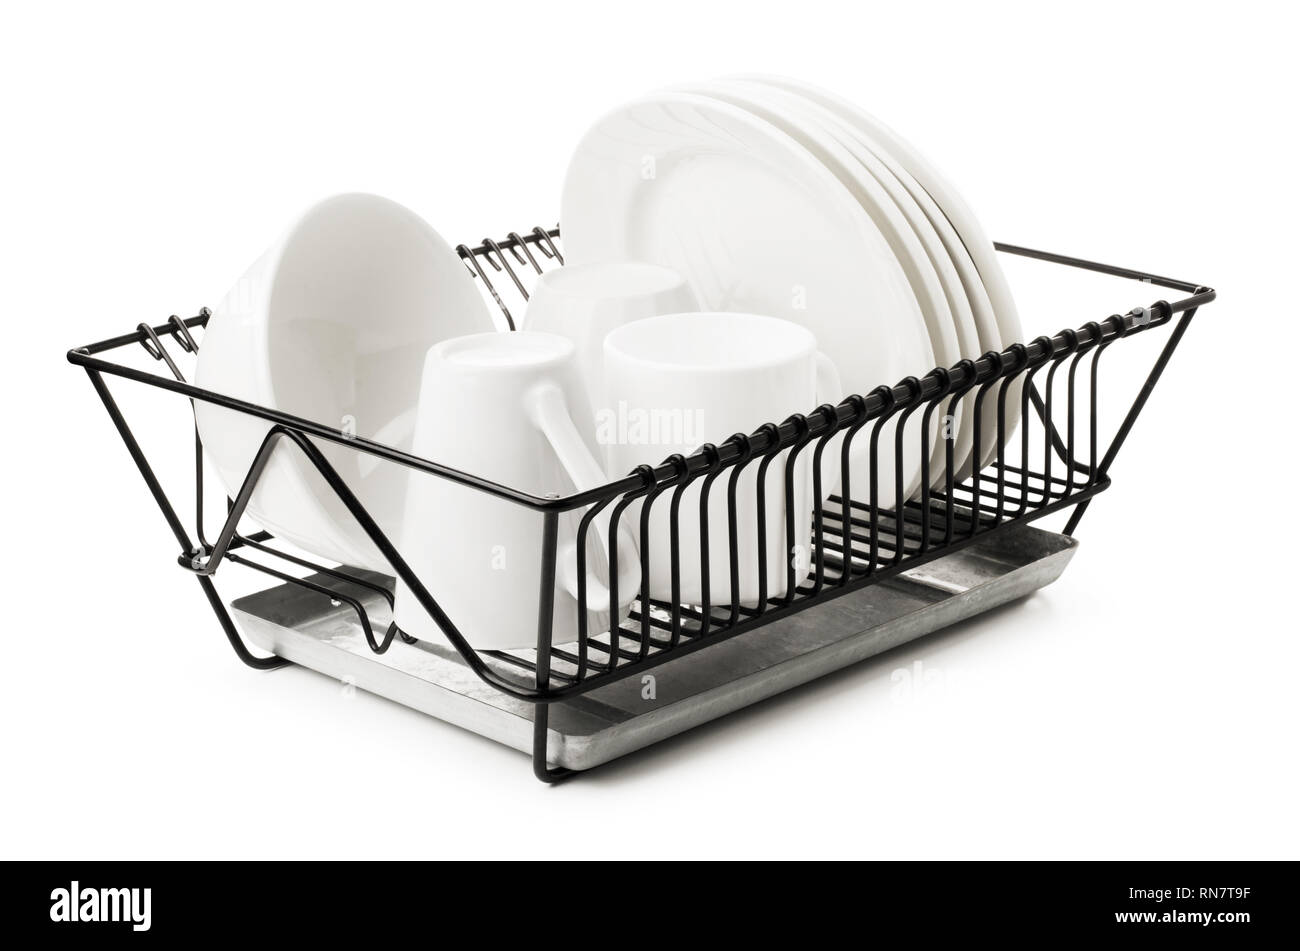 Clean dishes drying on metal dish rack, isolated on white background Stock Photo